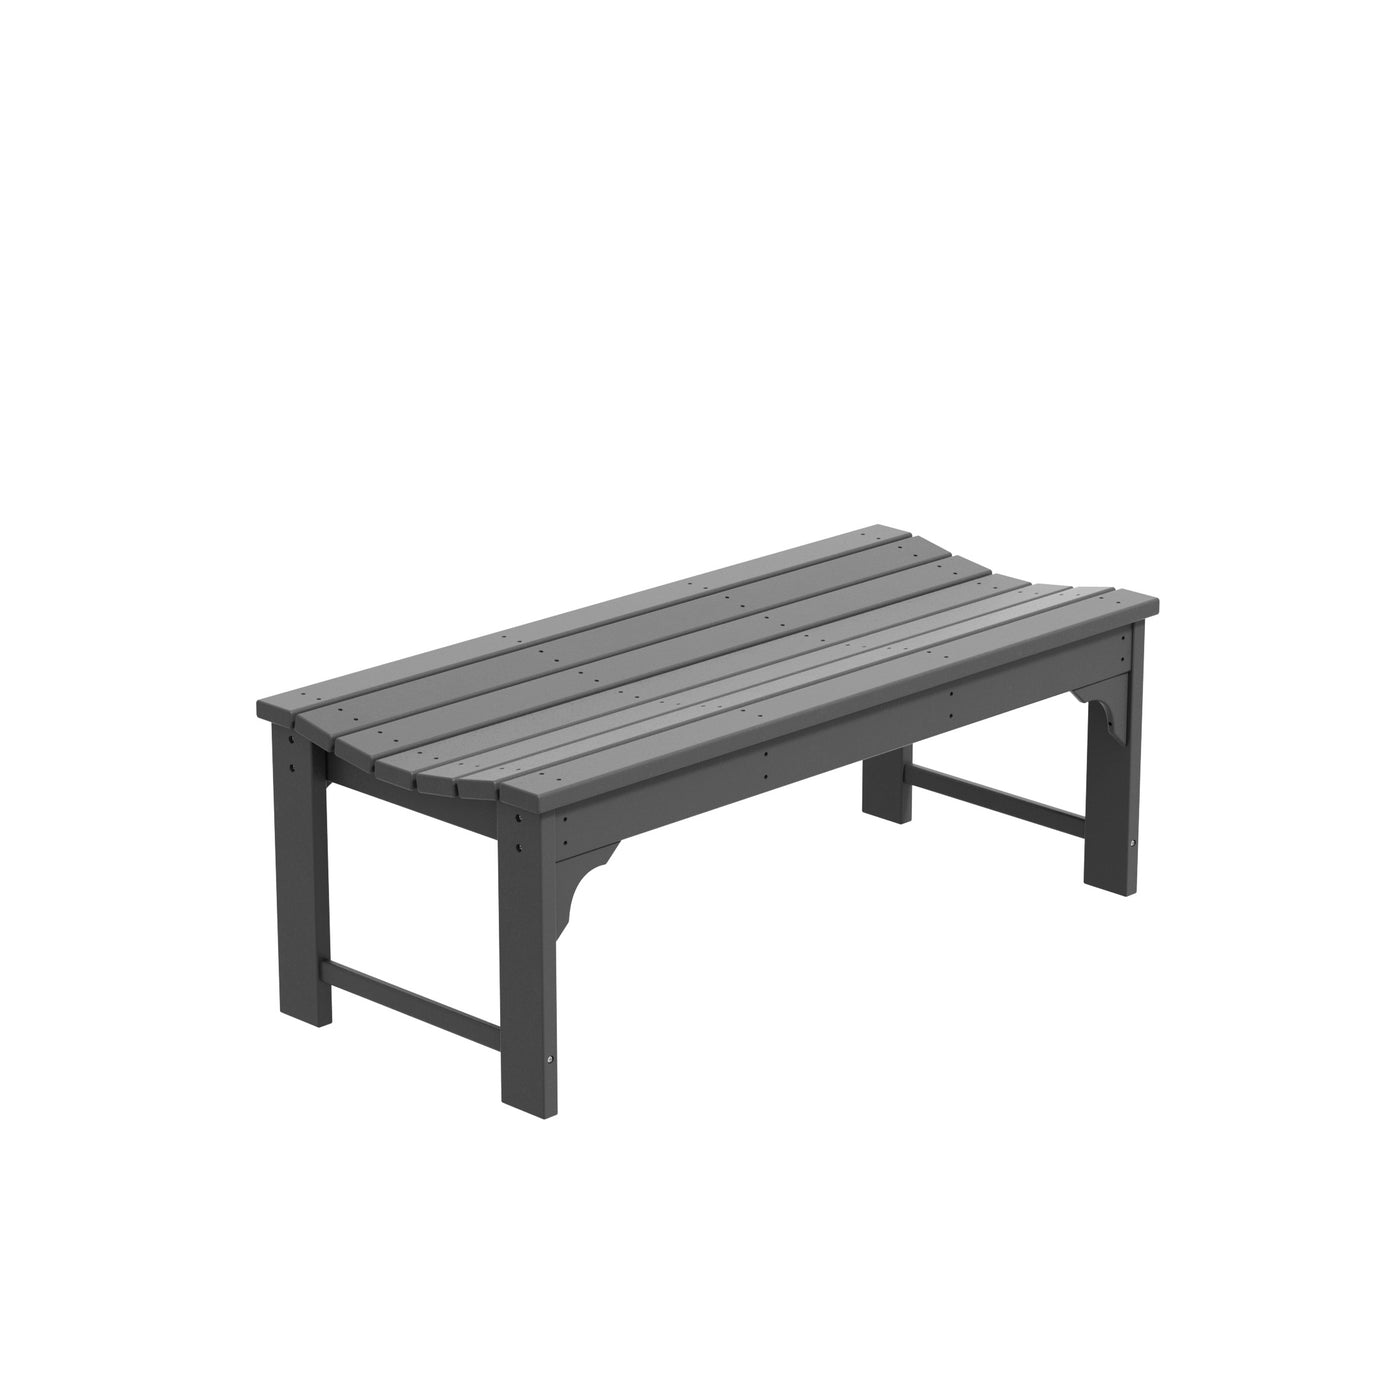 Malibu Backless All-Weather Outdoor Bench for Patio Garden